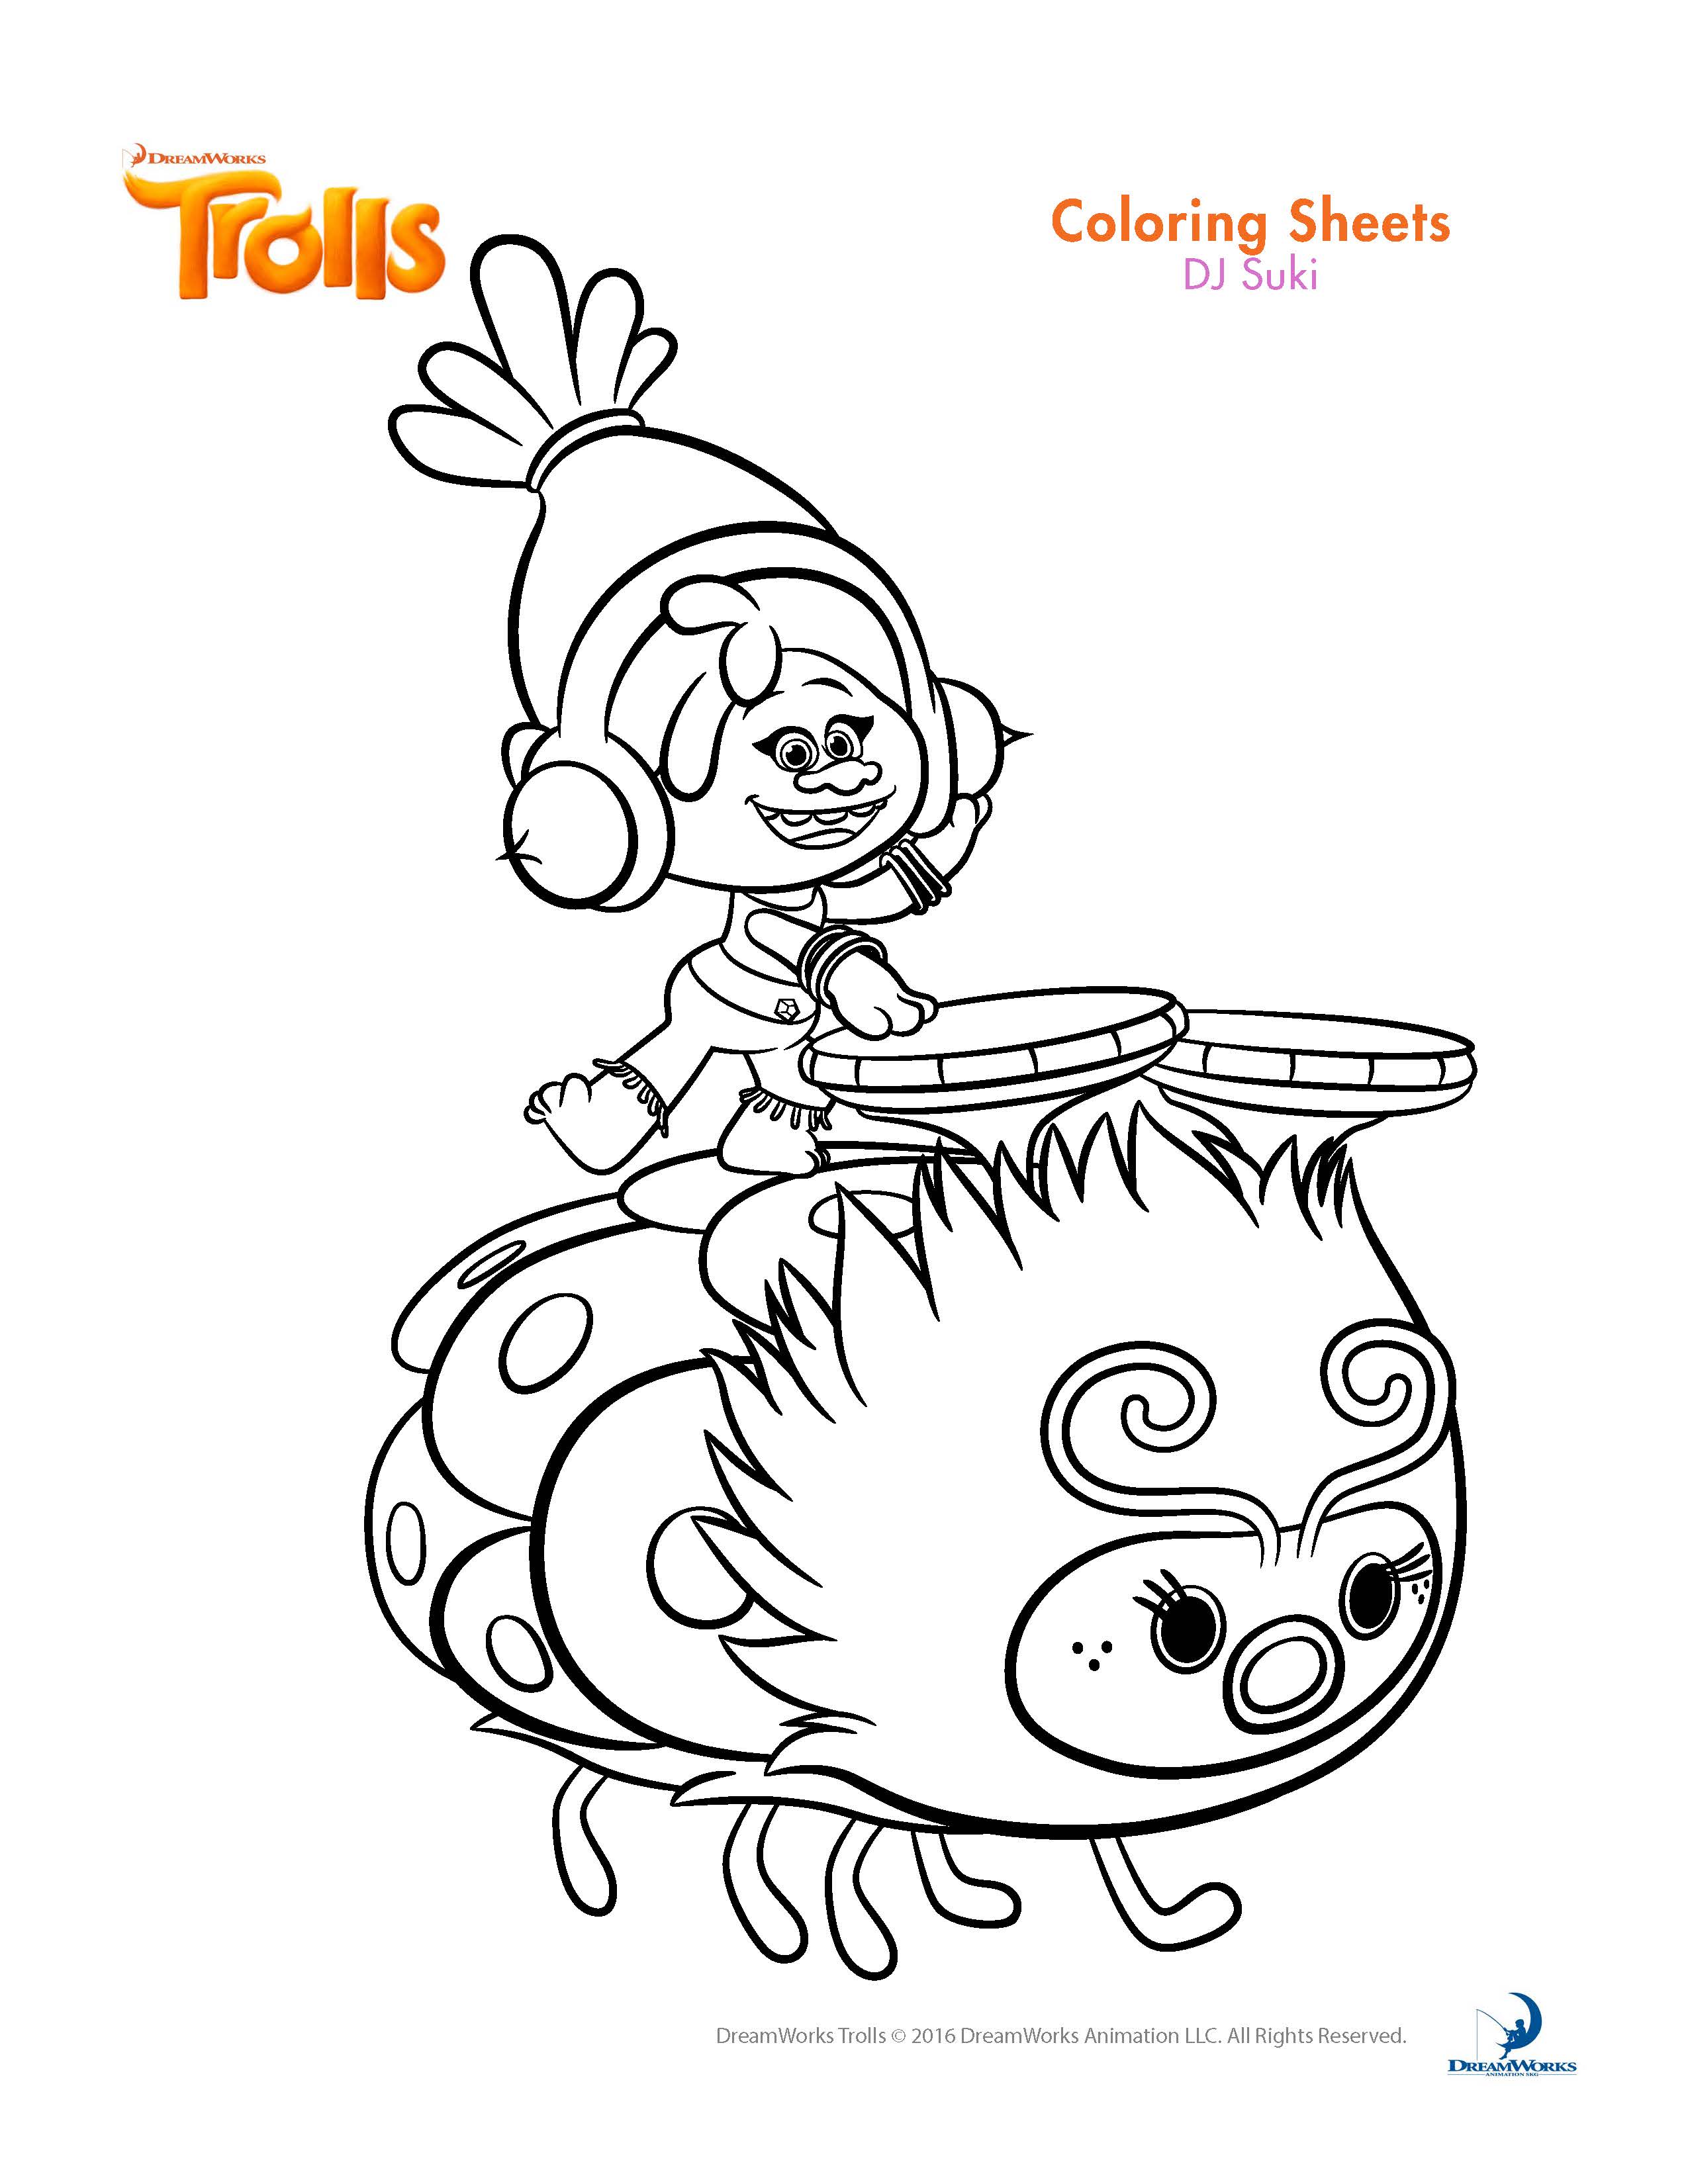 Trolls Movie Coloring Pages Best Coloring Pages For Kids Effy Moom Free Coloring Picture wallpaper give a chance to color on the wall without getting in trouble! Fill the walls of your home or office with stress-relieving [effymoom.blogspot.com]